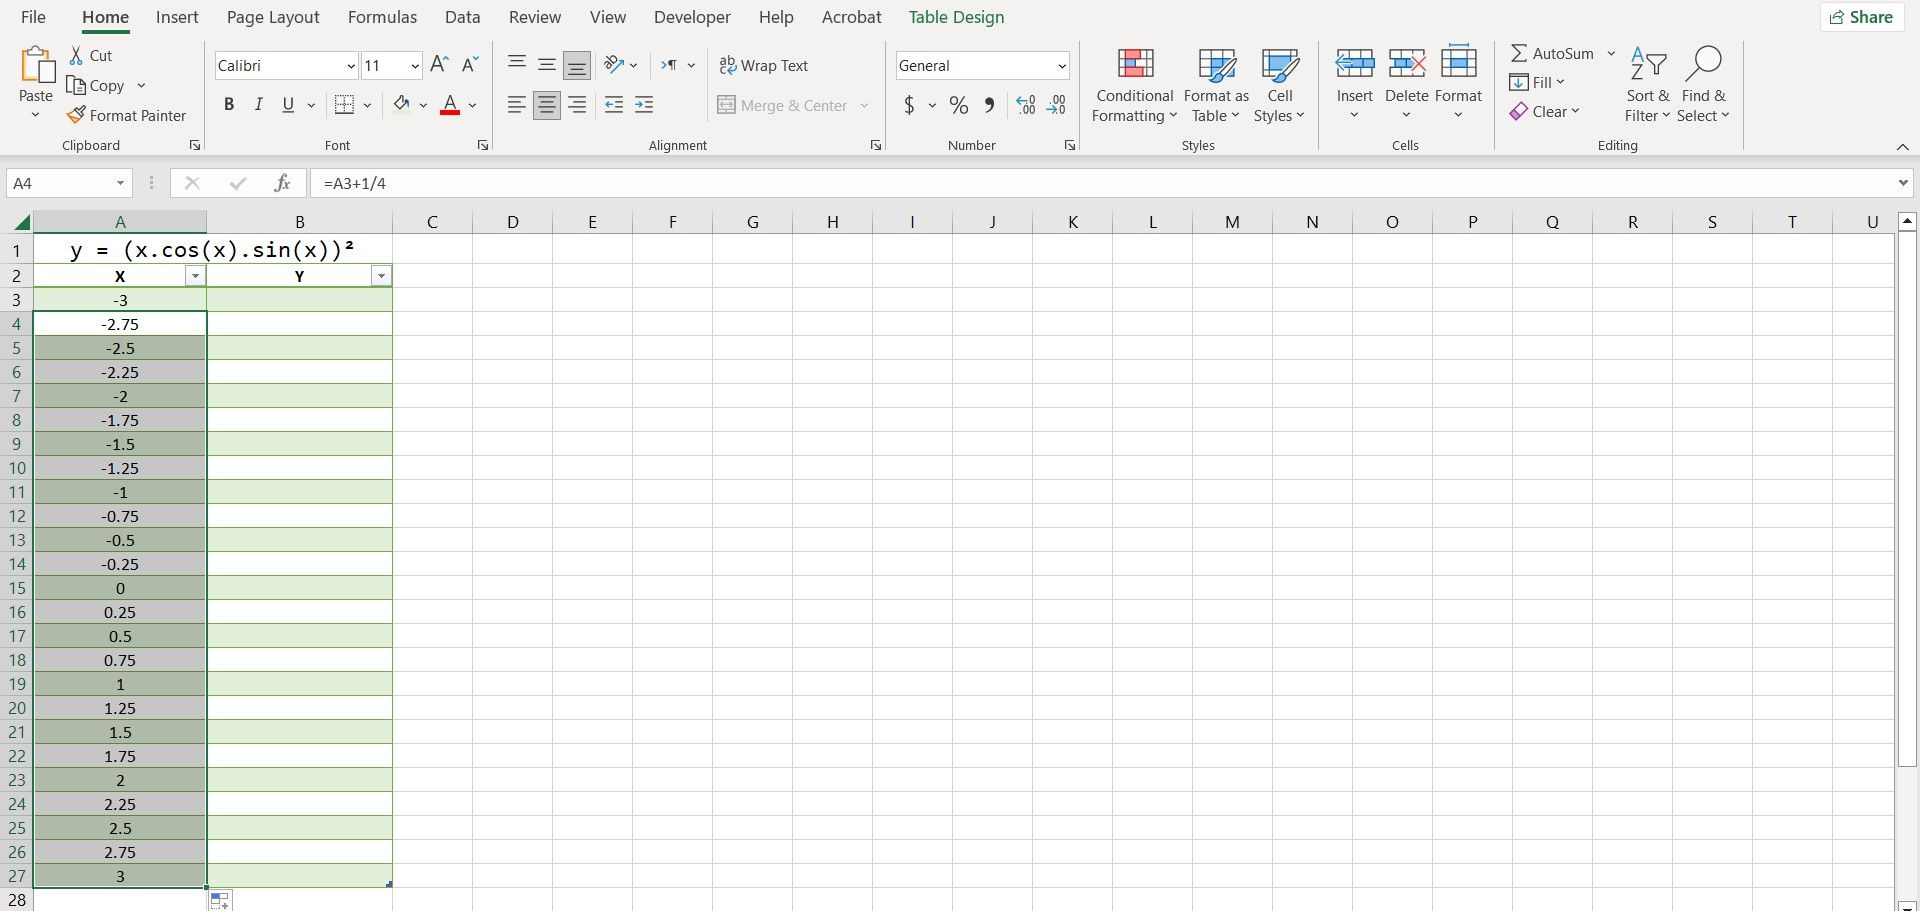 Inputting the X values for an equation in Excel